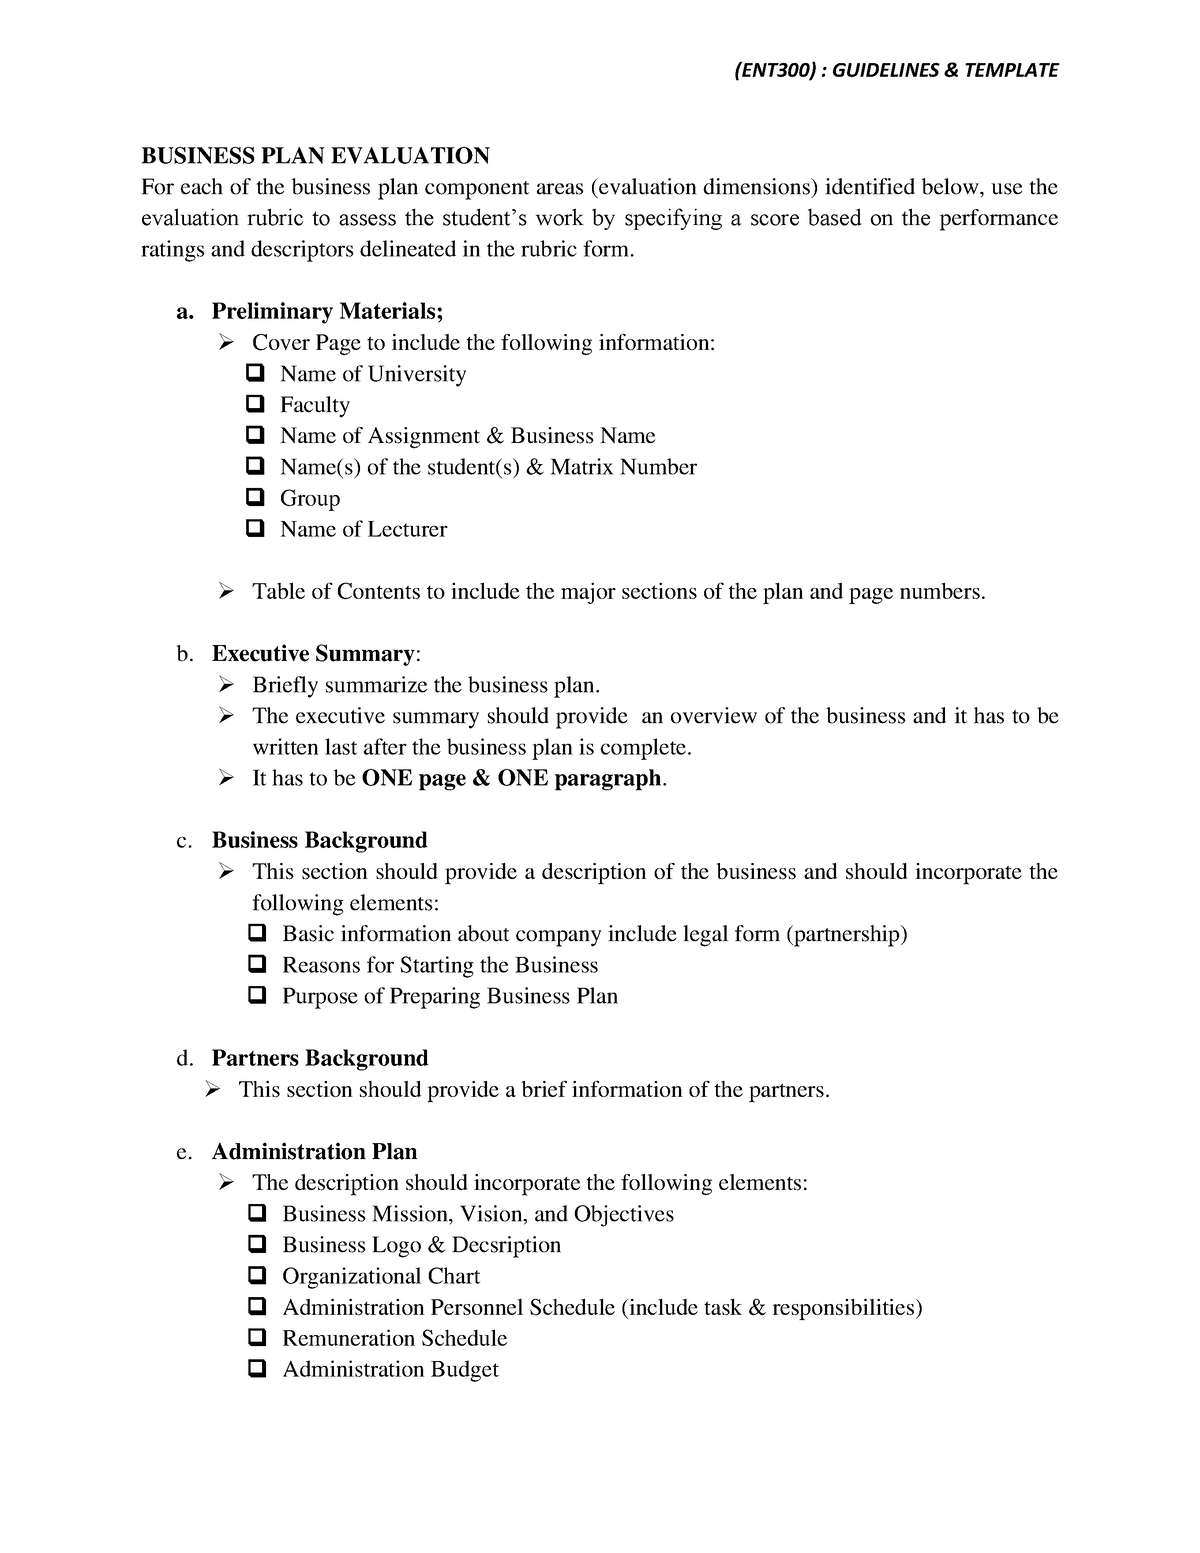 ent300 business plan individual assignment